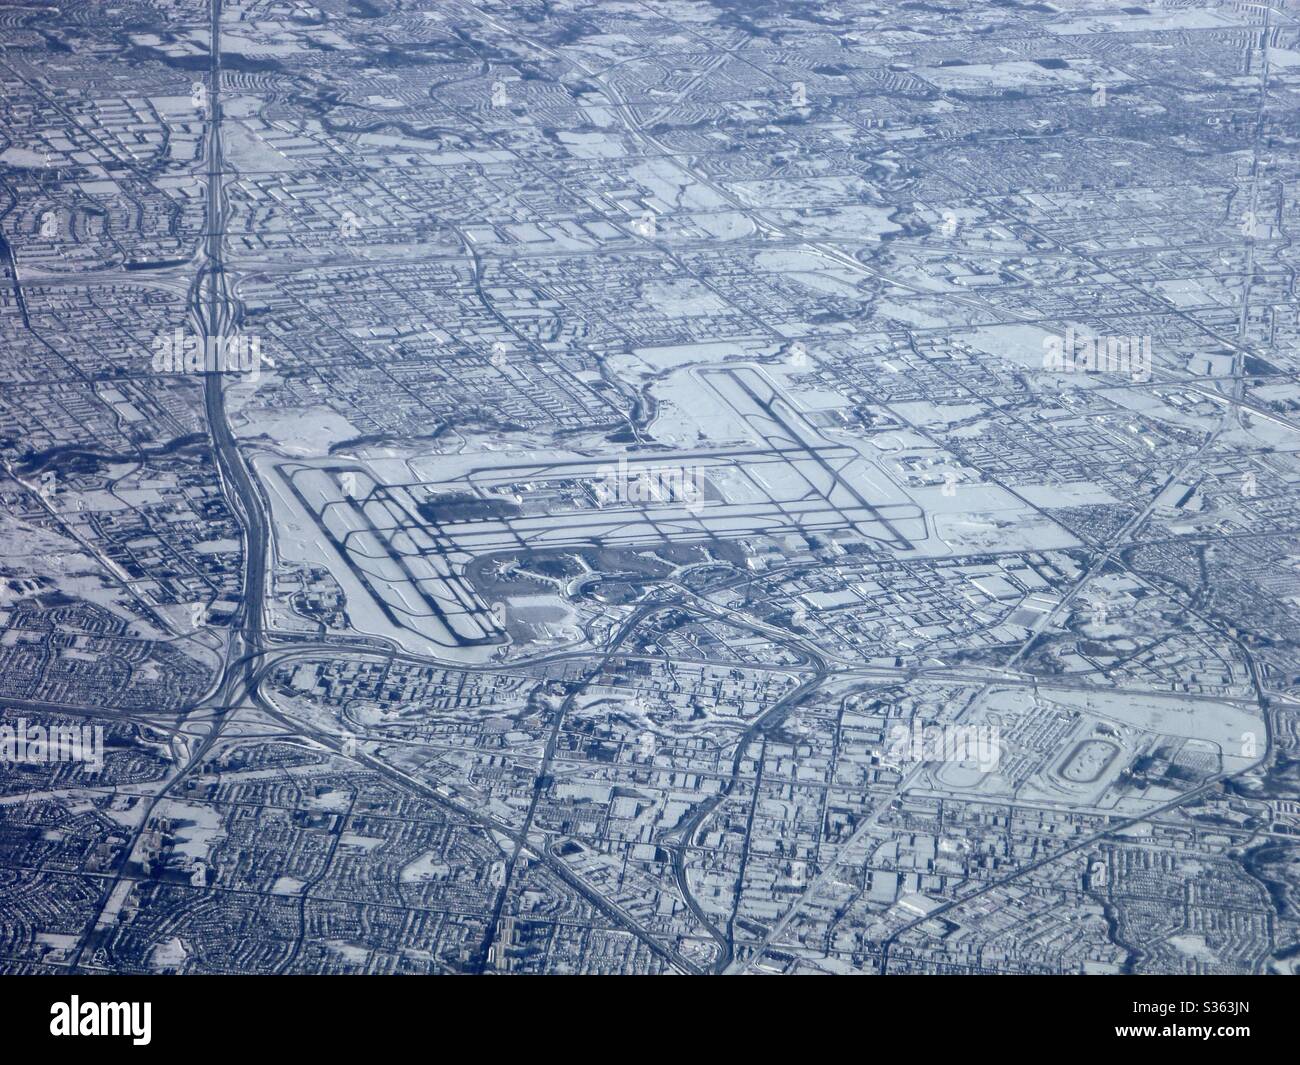 Aerial image of Toronto Airport, Ontario in the winter with snow on the ground. Stock Photo